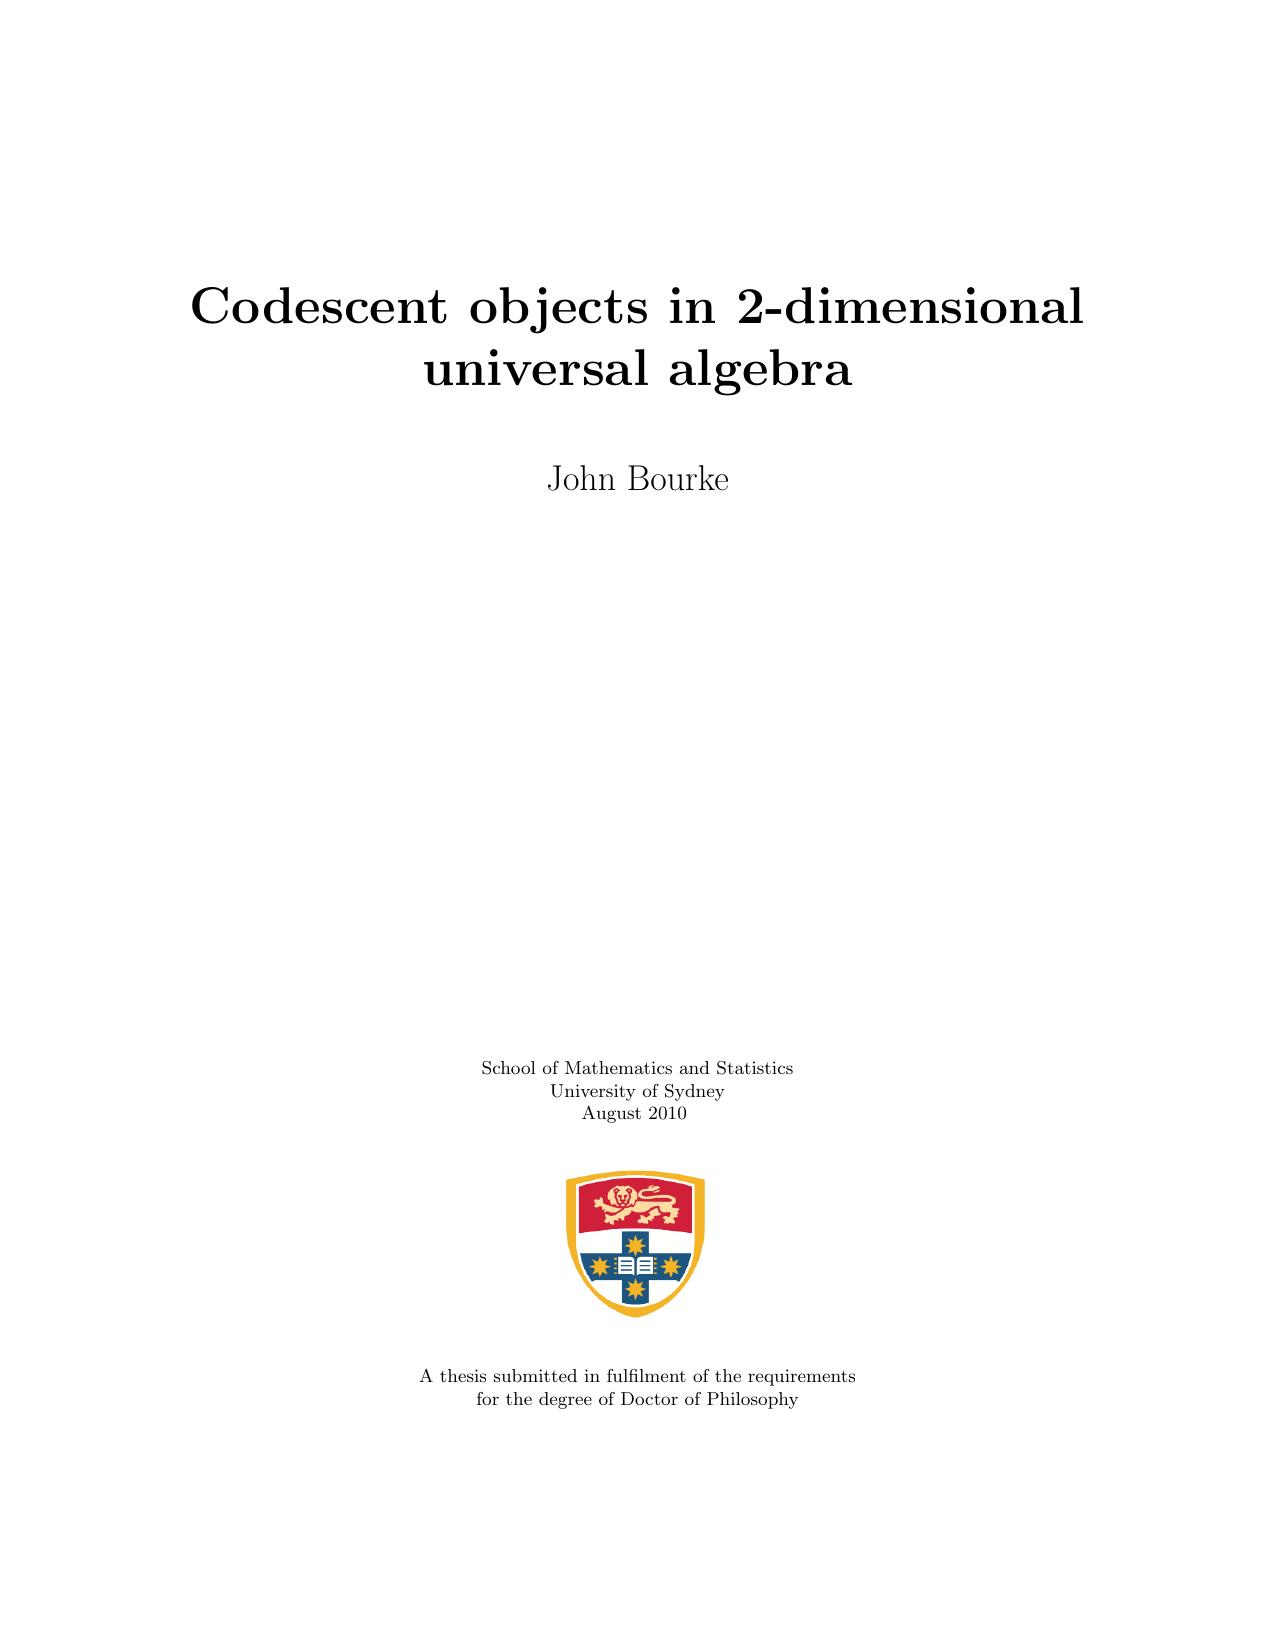 Codescent objects in 2-dimensional universal algebra